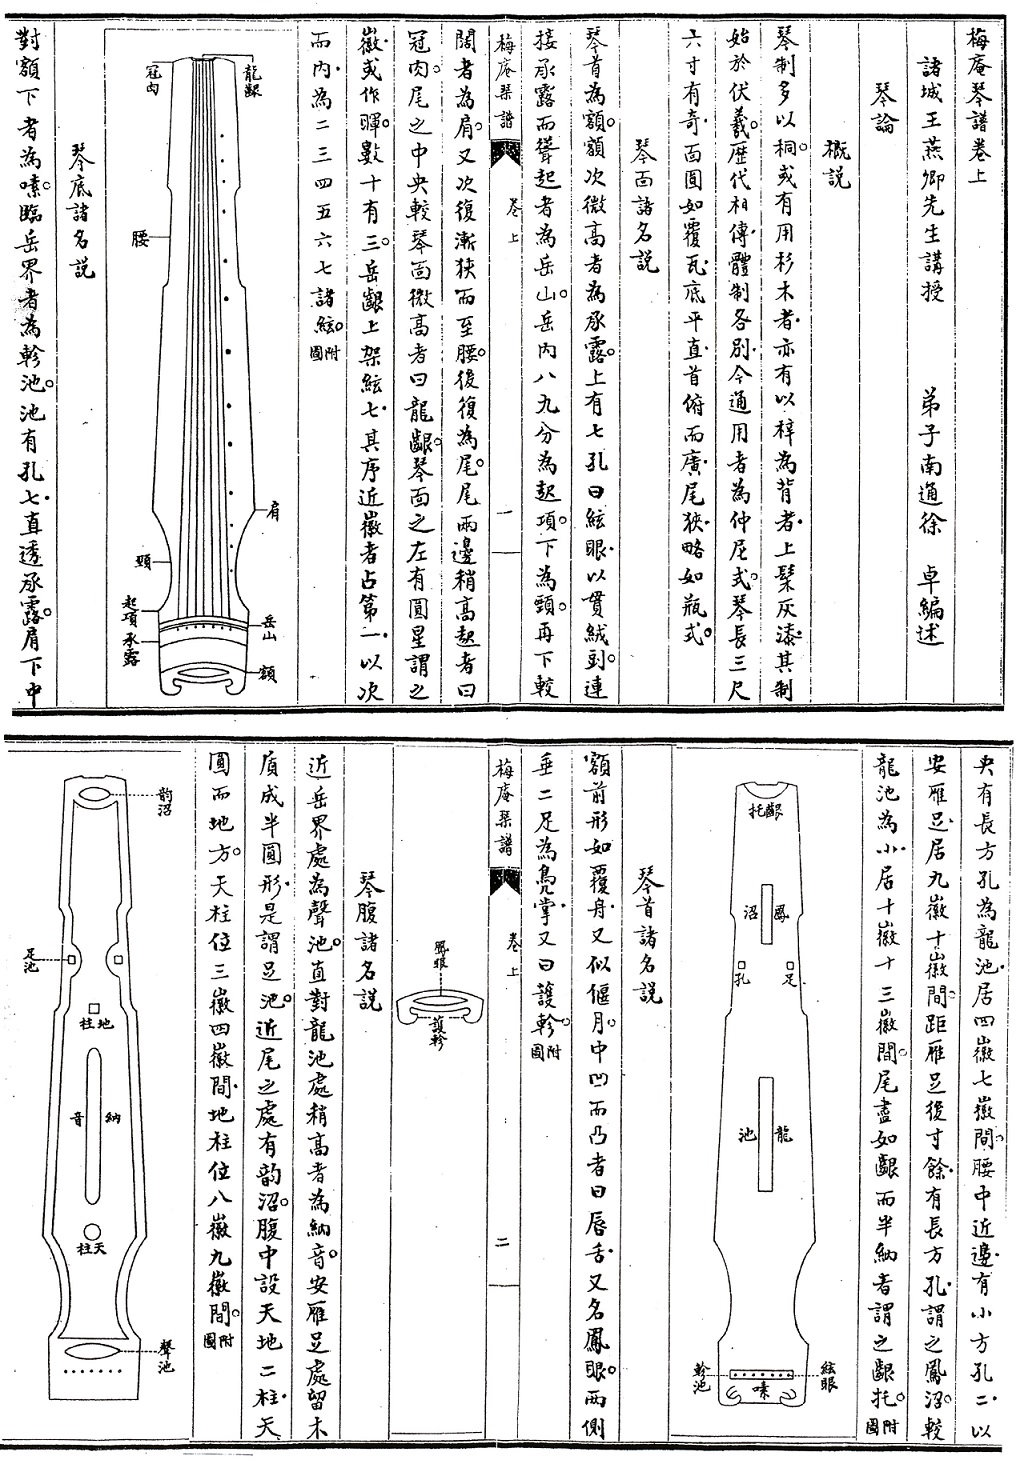 Names of the parts at the upper and lower boards of the instrument, from Mei’an Qin Handbook of the early 20th century